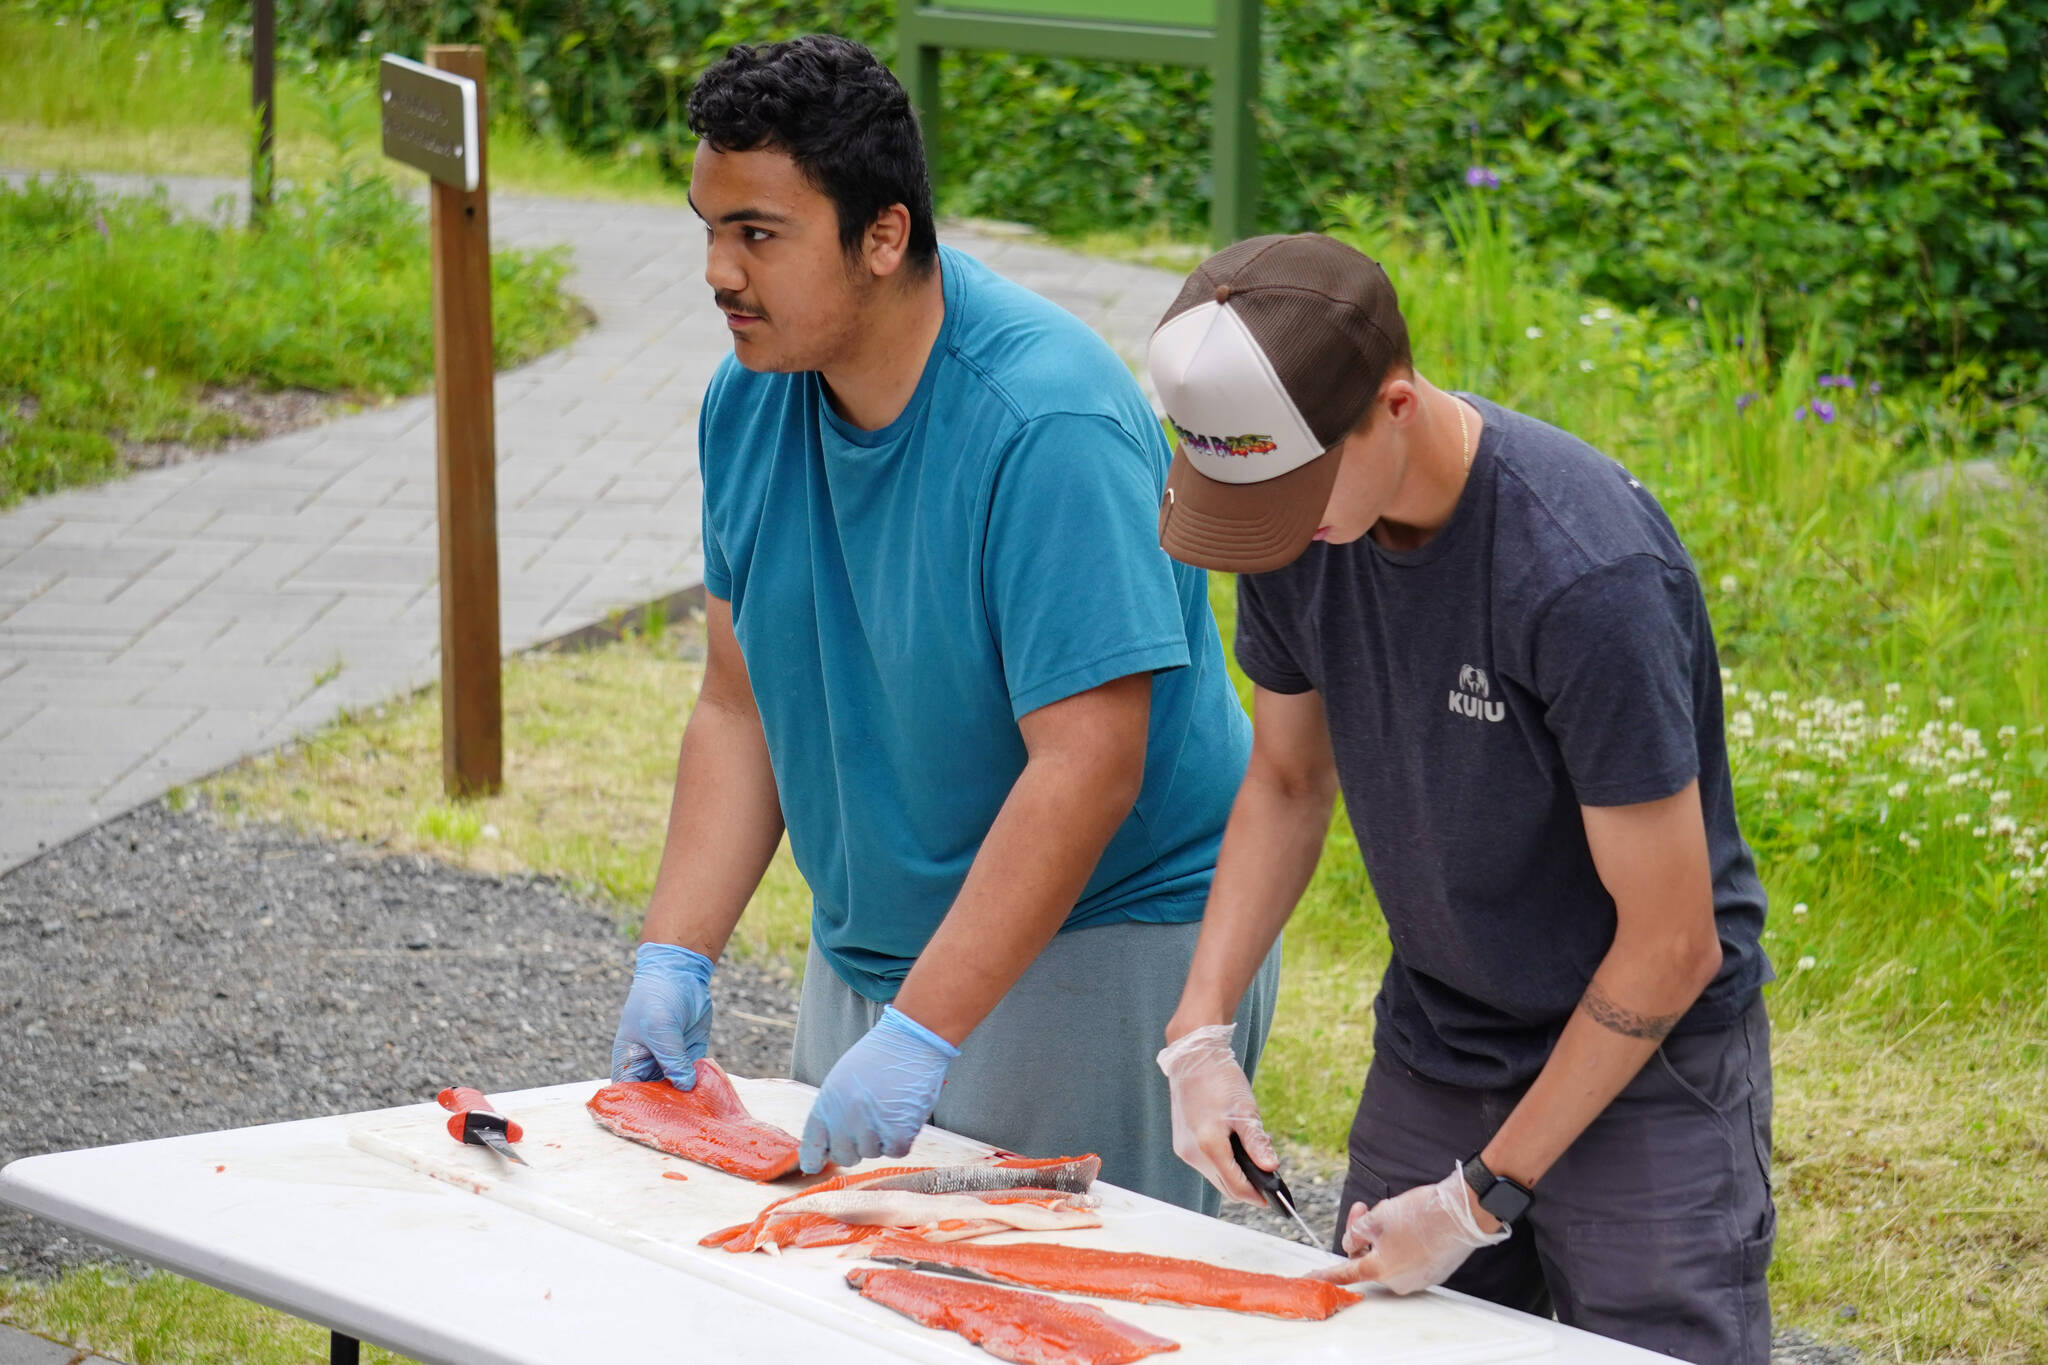 Marcus Wong and Ransom Hayes demonstrate slicing salmon fillets into strips during a smoked salmon demonstration, part of Fish Week 2023, on Wednesday, July 19, 2023, at the Kenai National Wildlife Refuge Visitor Center in Soldotna, Alaska. (Jake Dye/Peninsula Clarion)